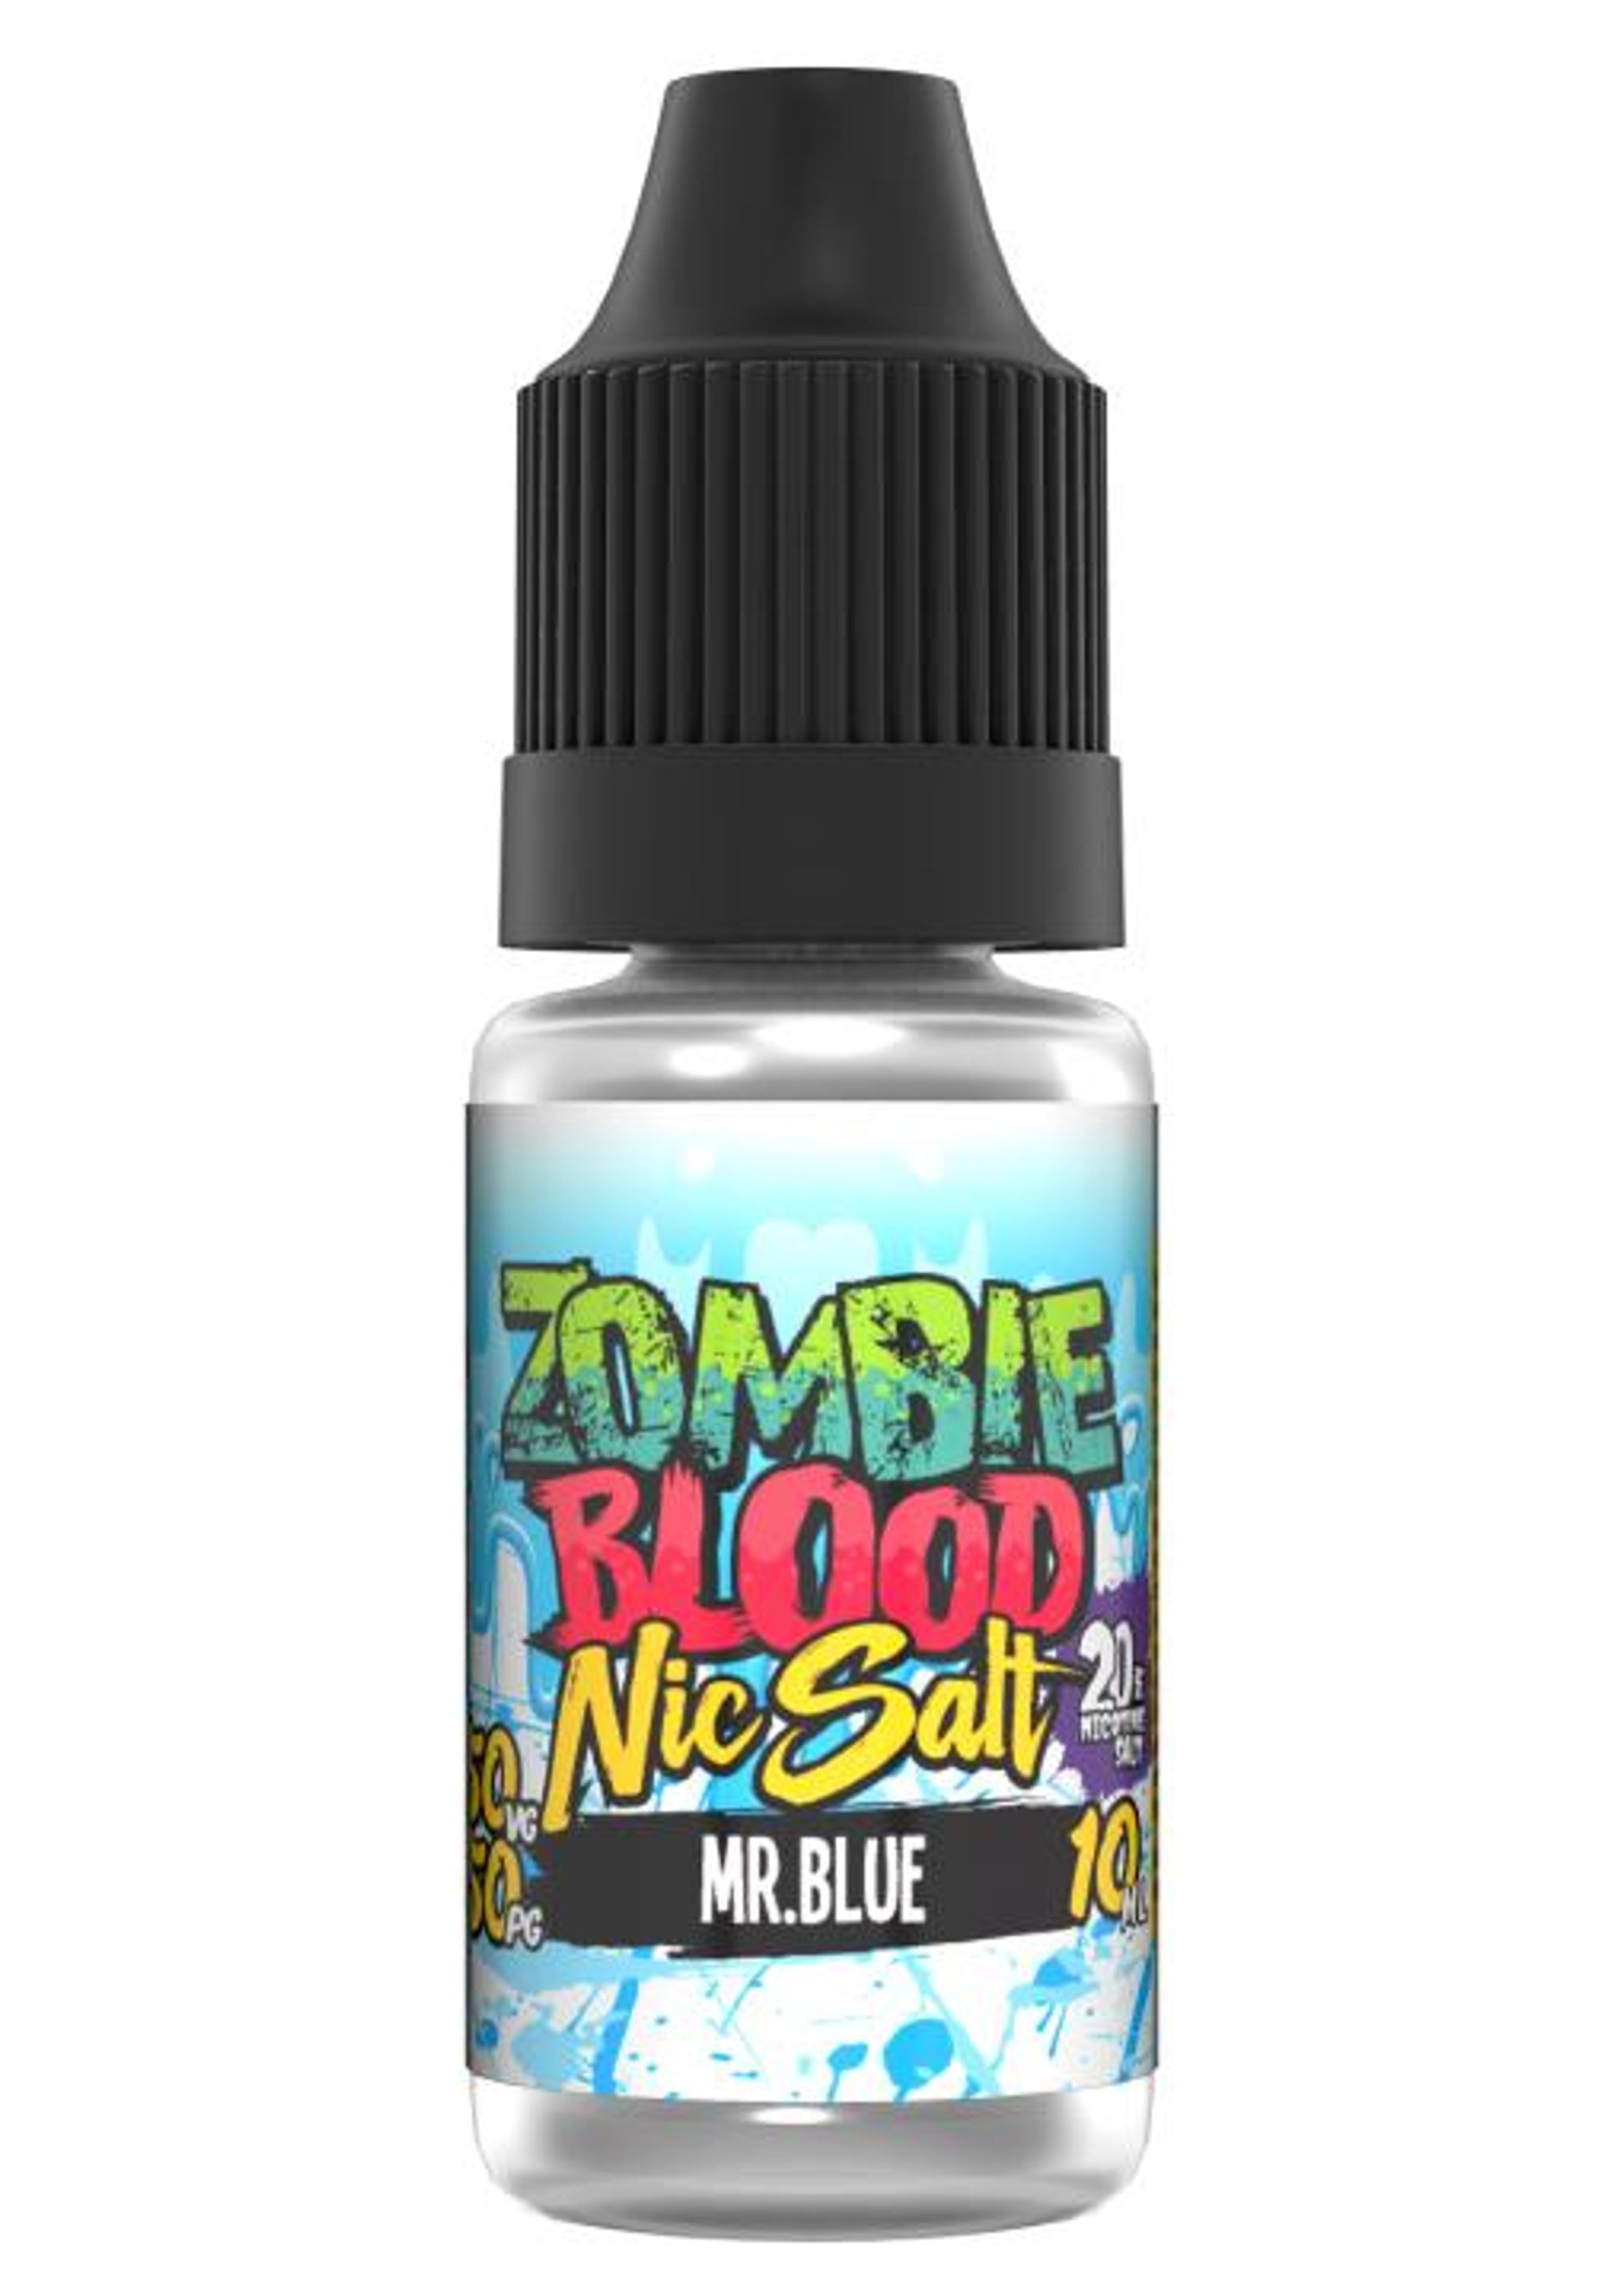 Image of Mr Blue by Zombie Blood